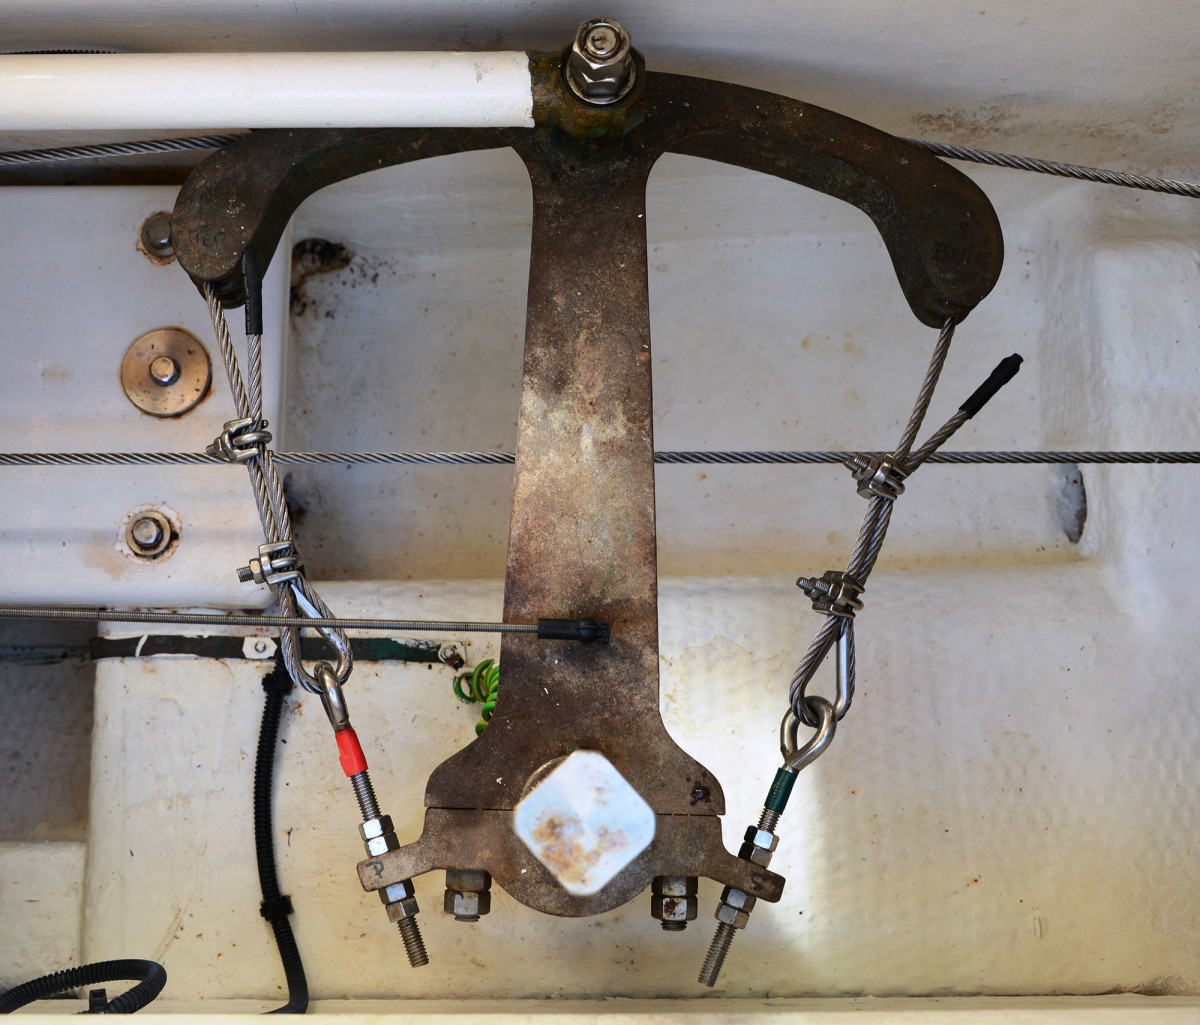 This steering quadrant clamps onto the rudder post at the bottom center. The round post has been machined square to accept an emergency tiller. This older system relies on stainless steering cables to move the rudder. The cables wrap around thimbles to protect them from wear and the bitter end section is called the dead end. 